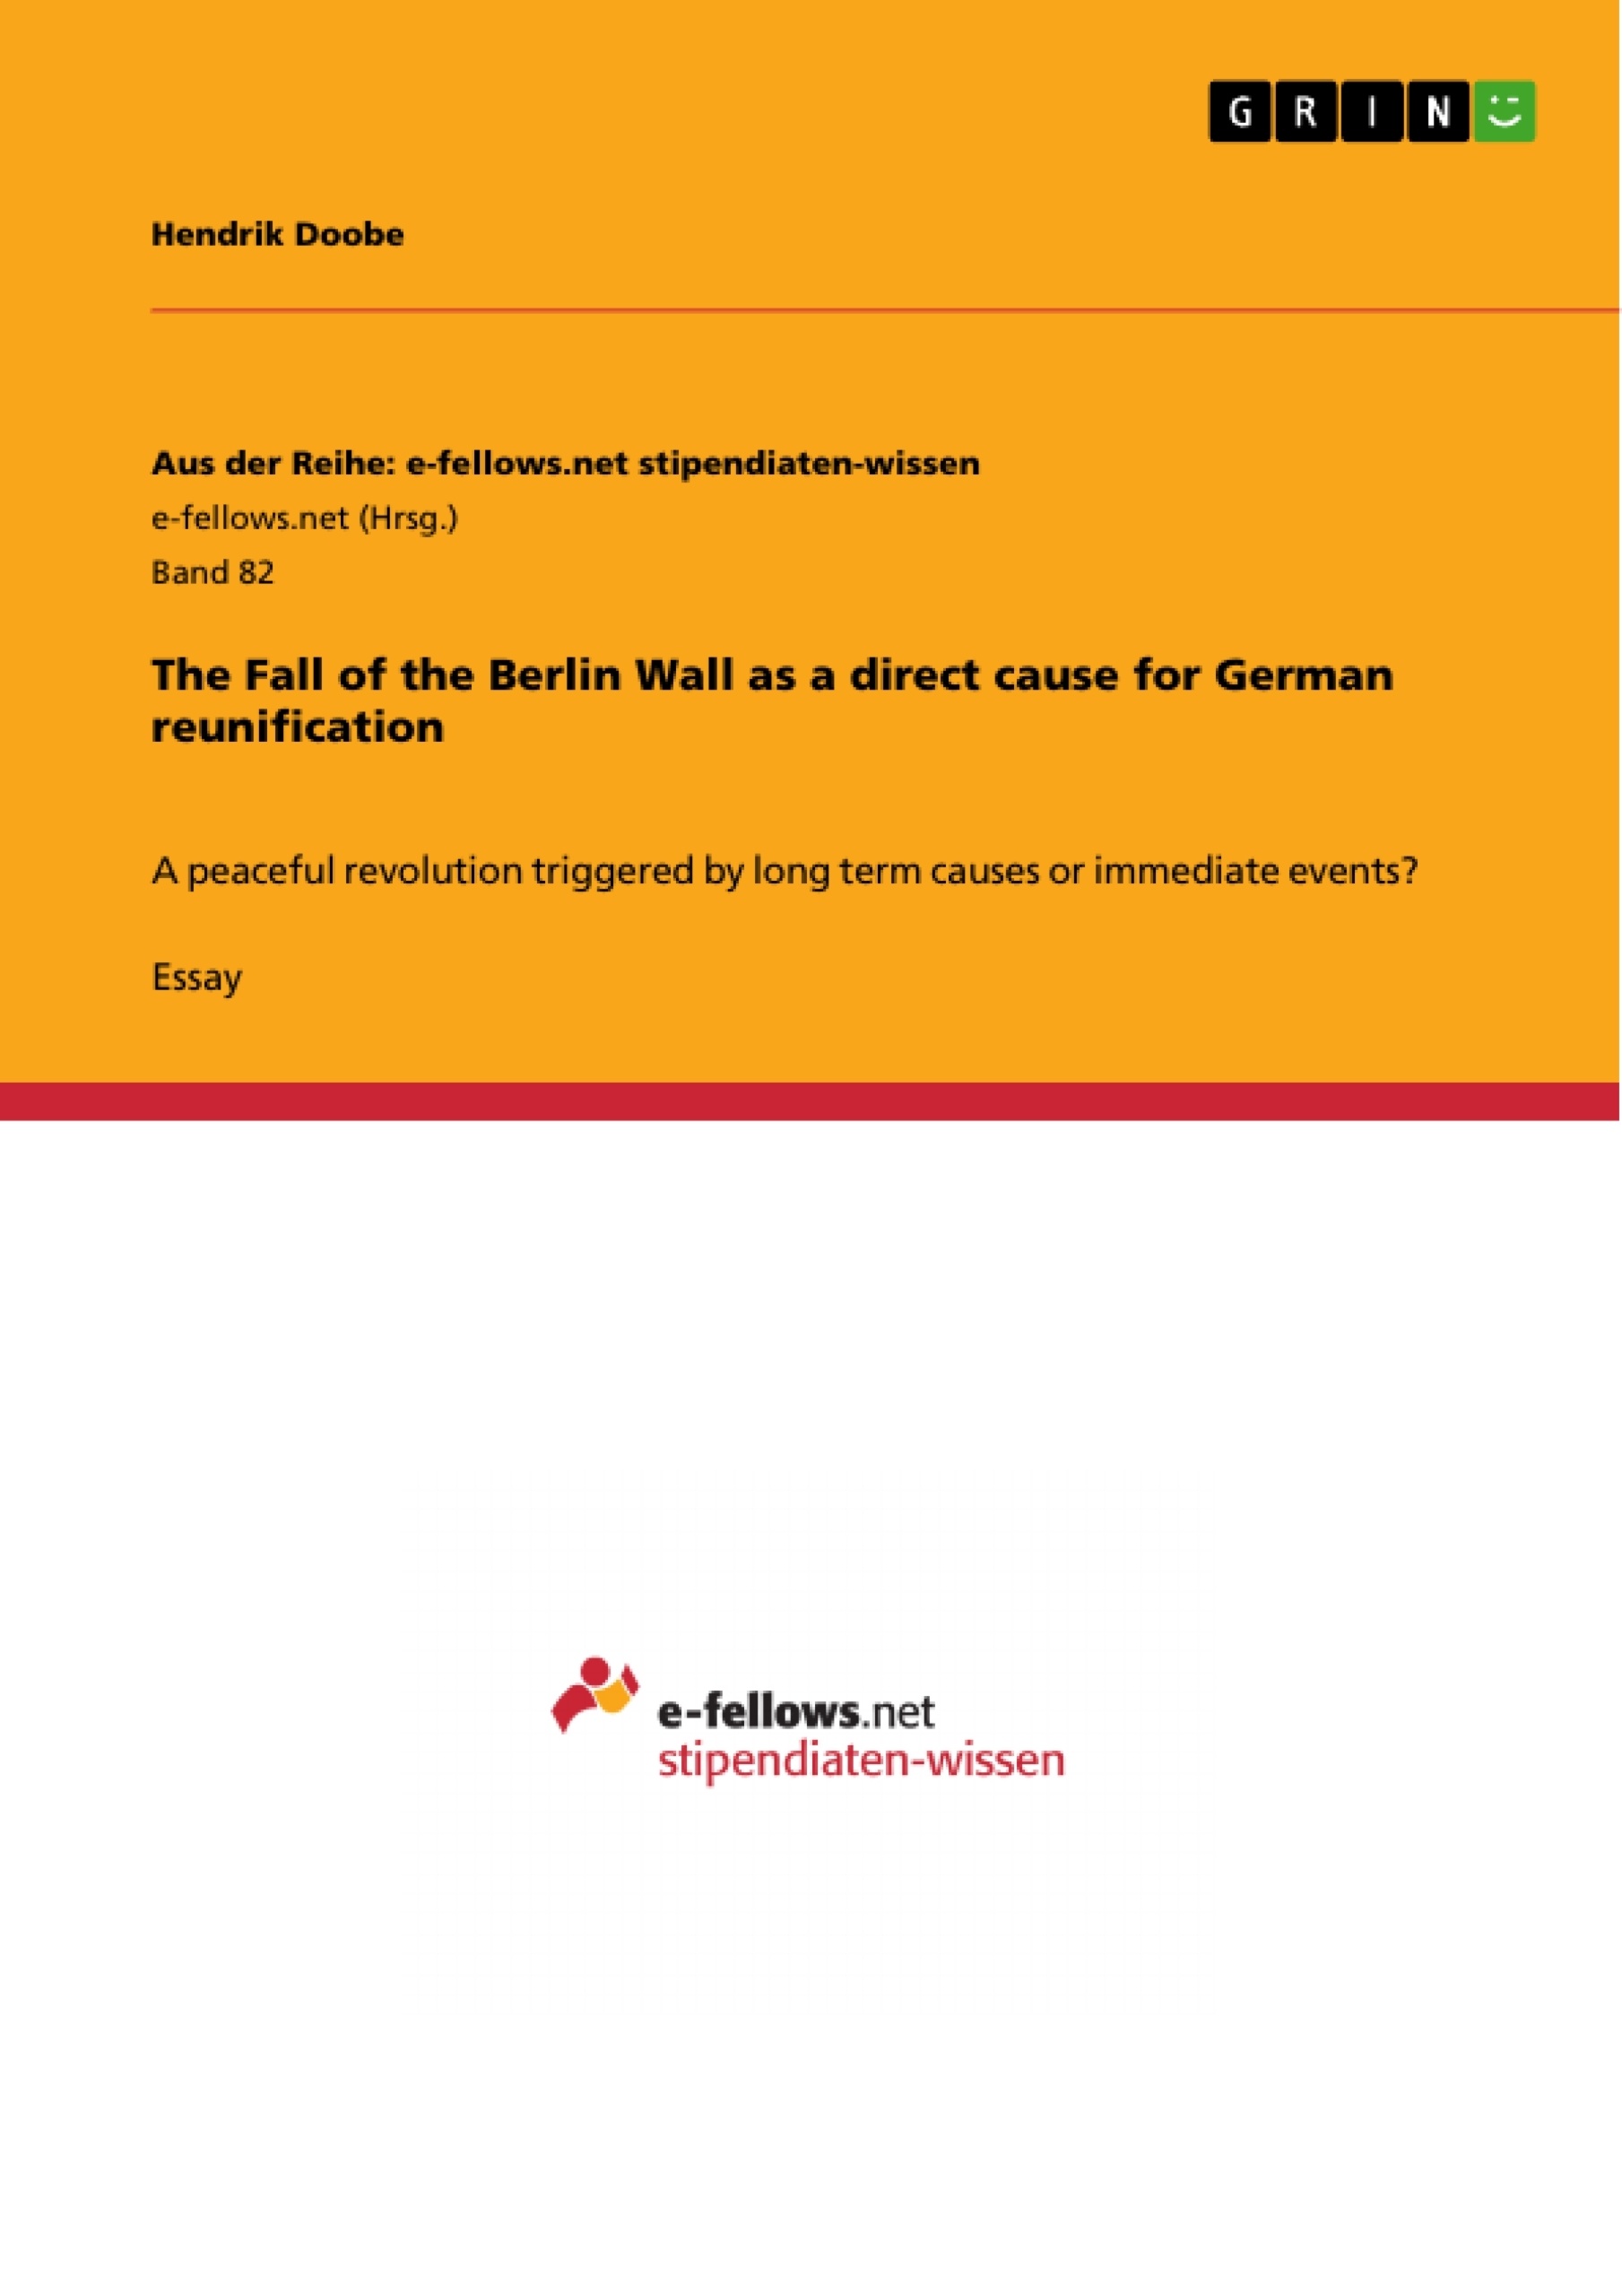 Título: The Fall of the Berlin Wall as a direct cause for German reunification